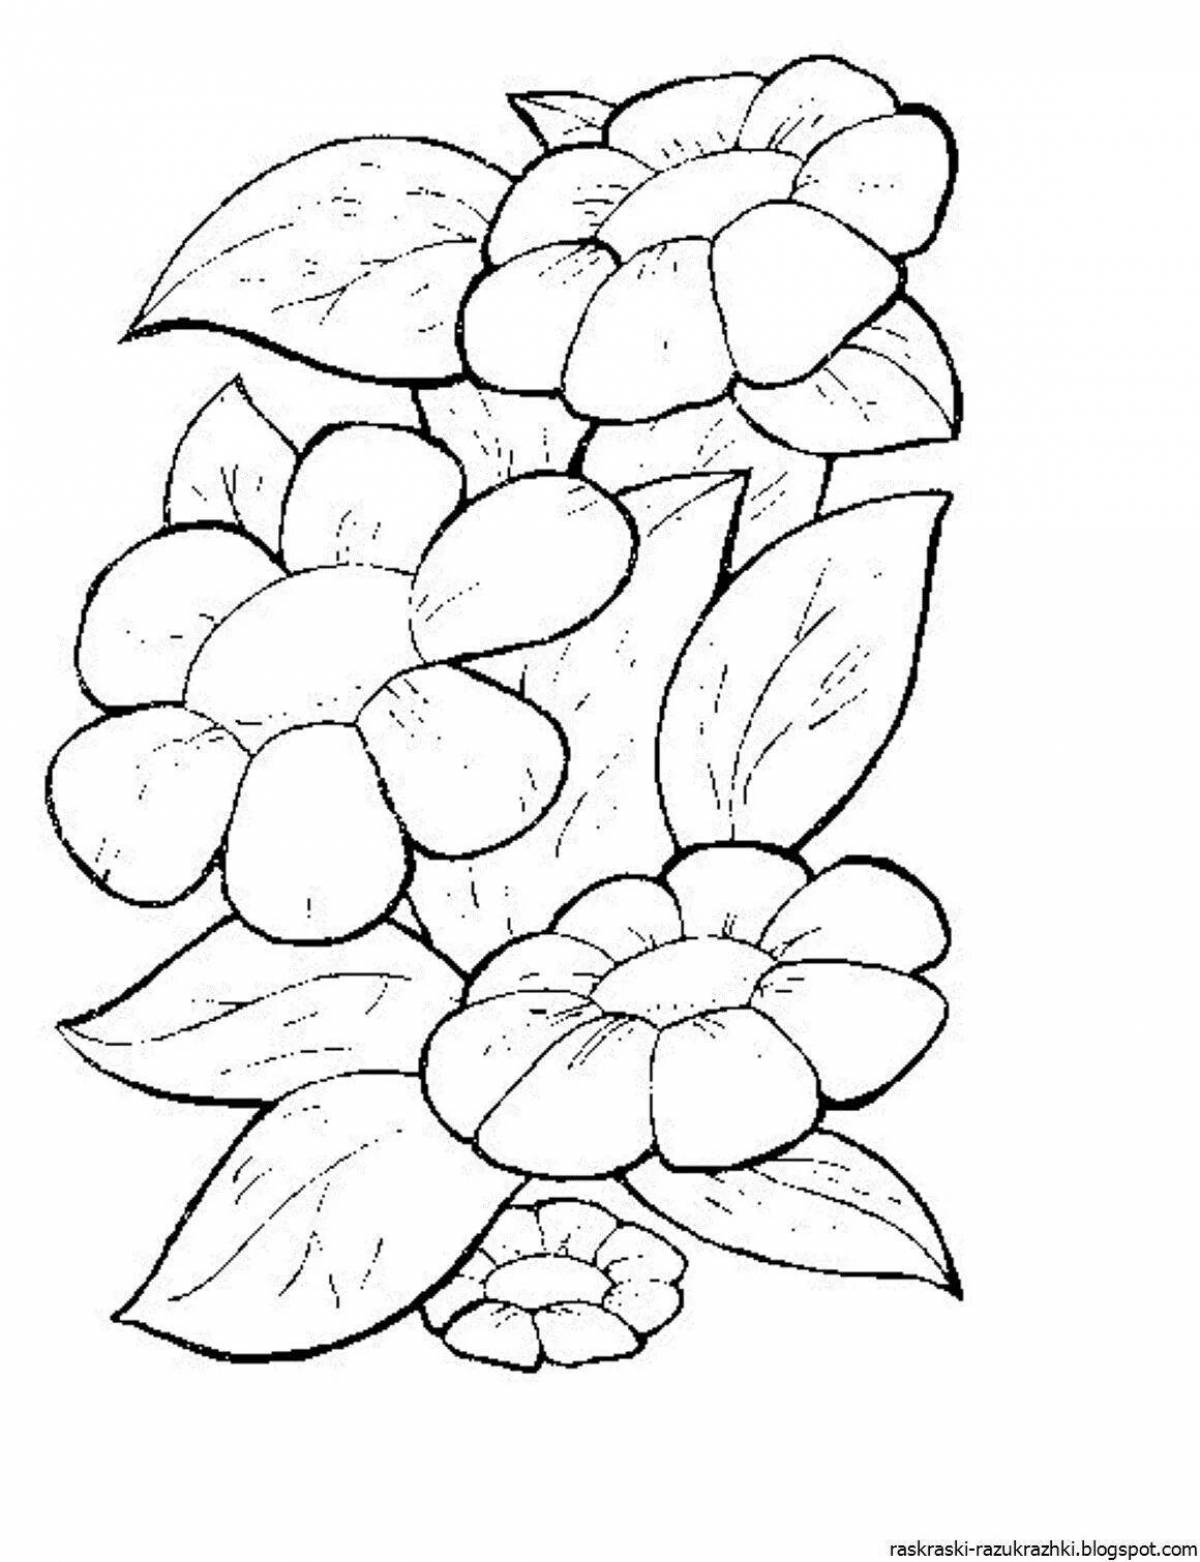 Calming flower coloring book for 5-6 year olds